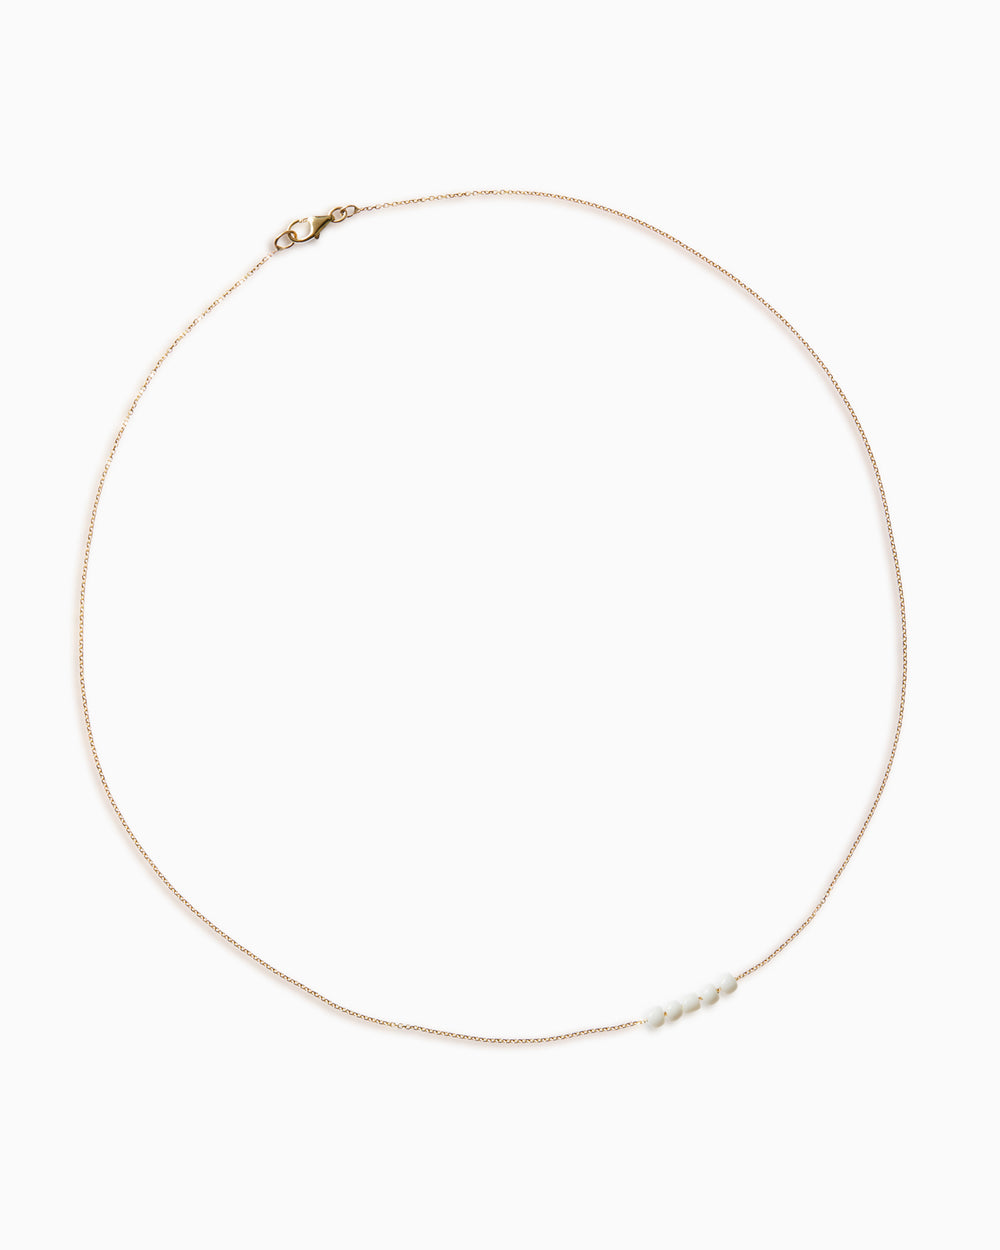 Beaded Diamond Cut Chain White | Solid Gold